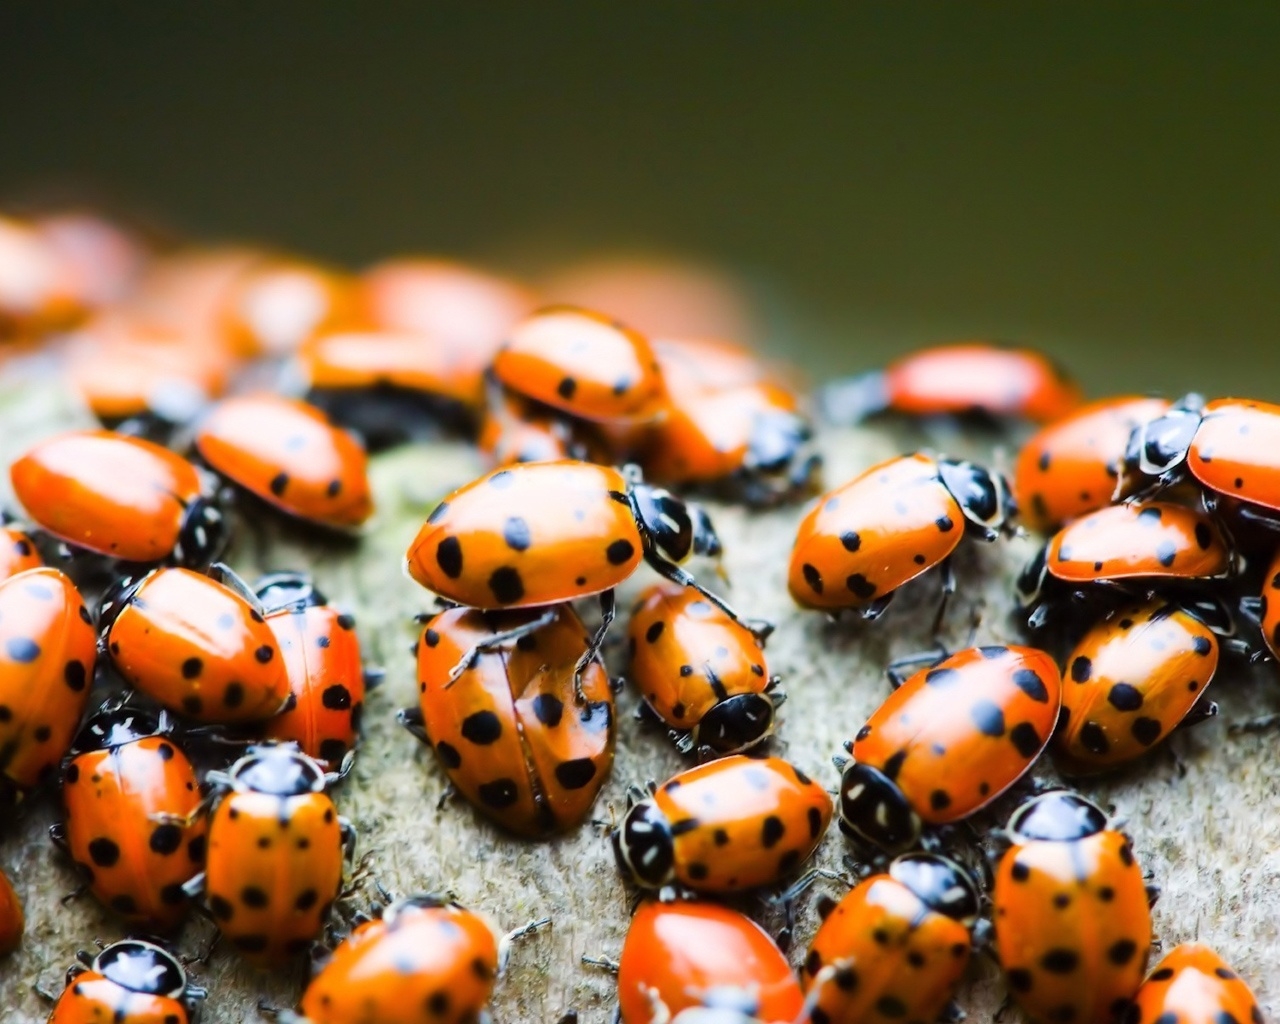 Lady bugs for 1280 x 1024 resolution